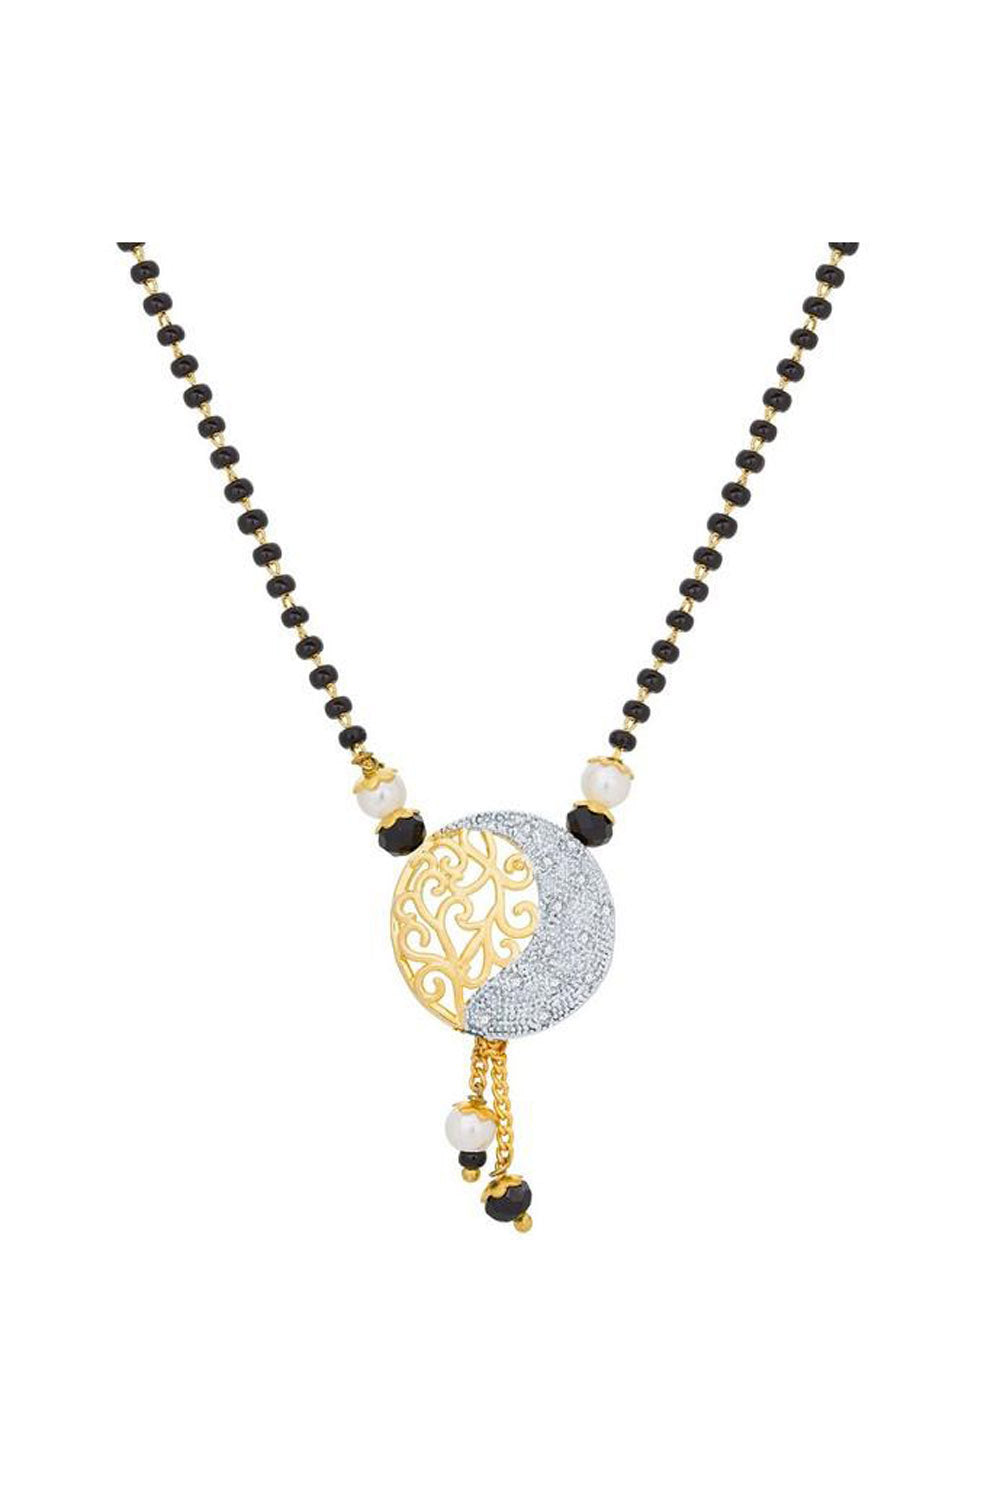 Women's Alloy Mangalsutra in Black, Gold and White